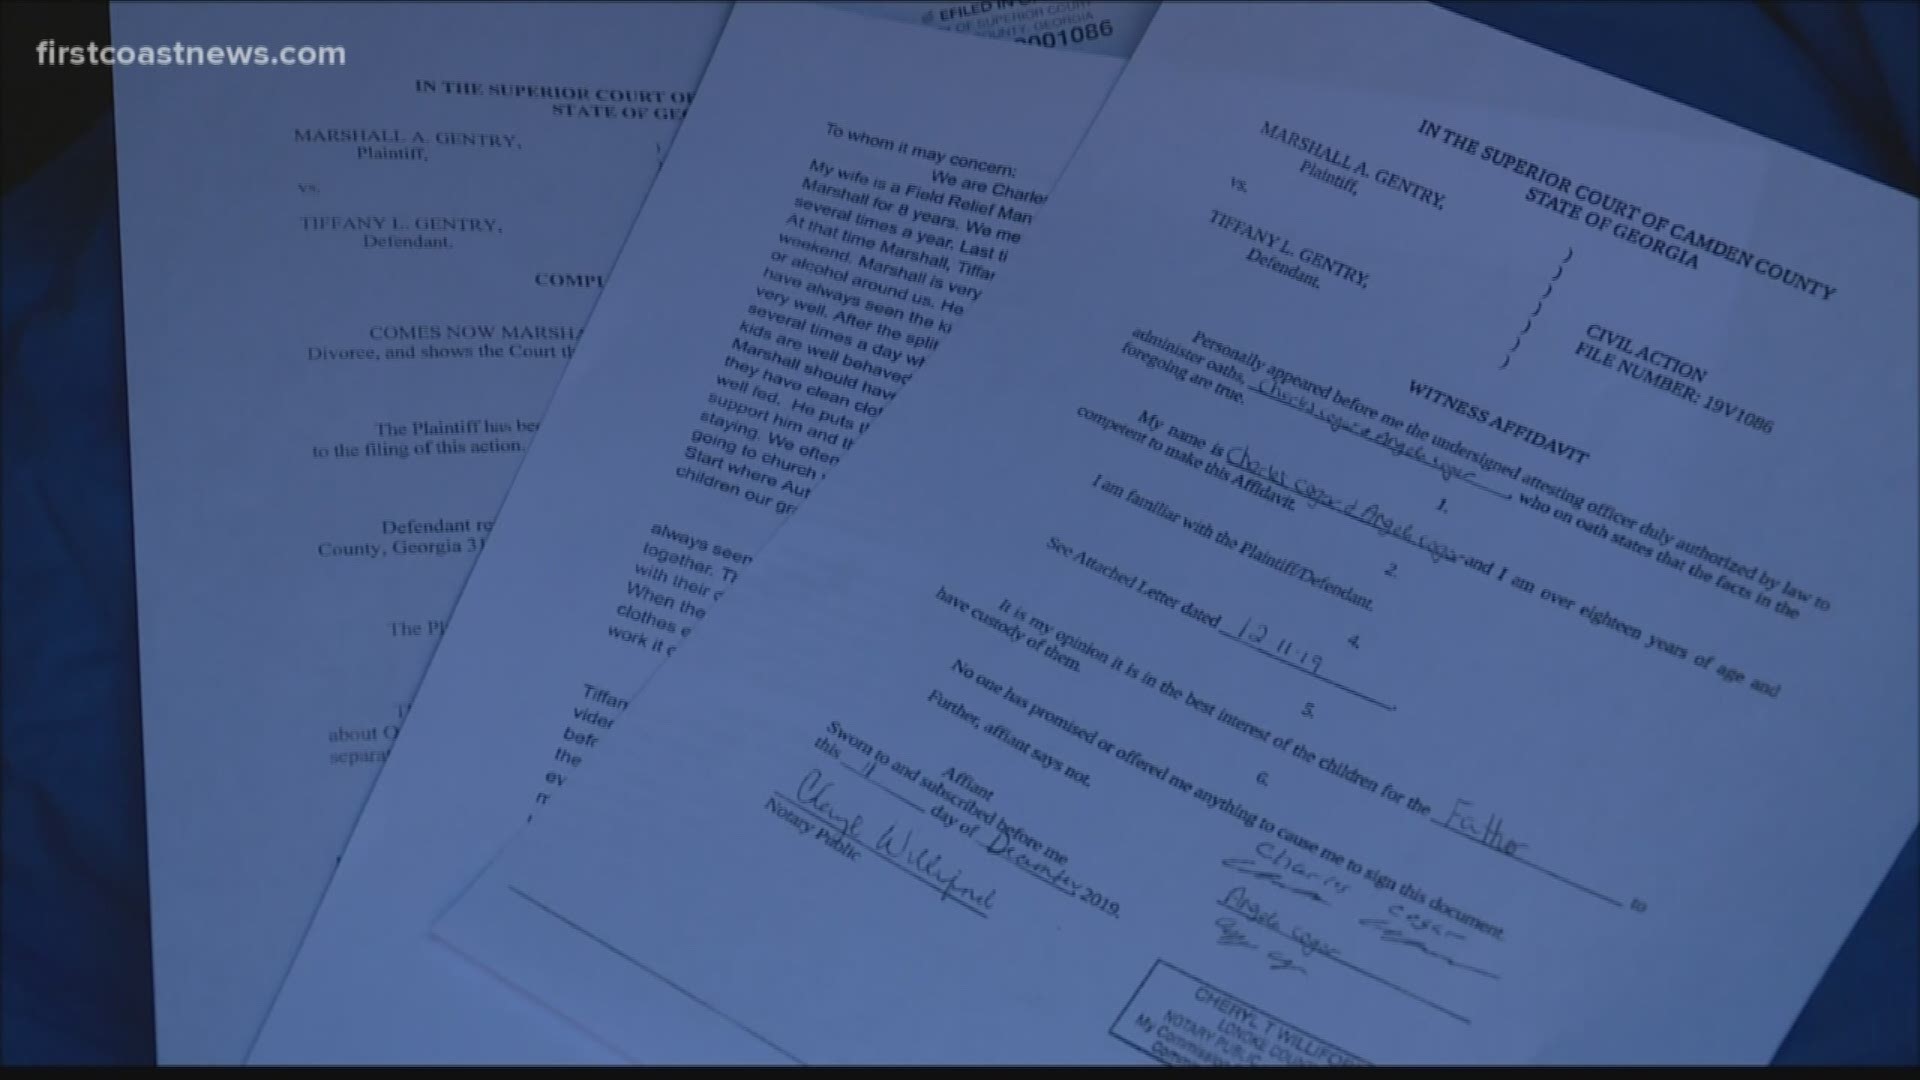 Dozens of documents were found pertaining to the couple's divorce, which was apparently dropped this month. The family tried moving to give their family another try.